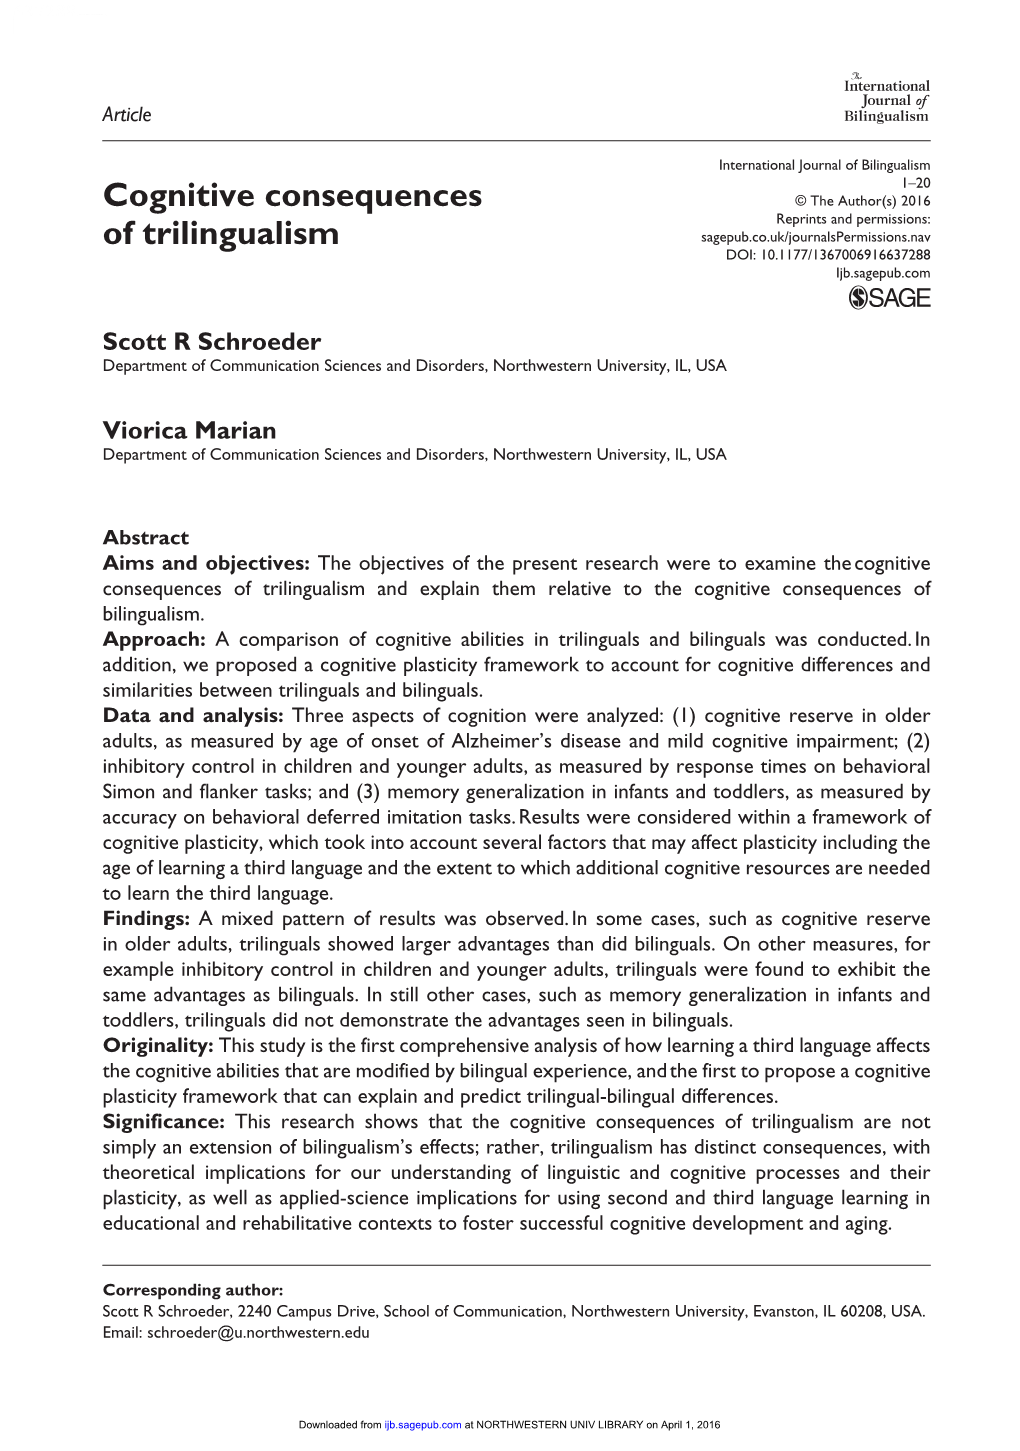 Cognitive Consequences of Trilingualism and Explain Them Relative to the Cognitive Consequences of Bilingualism